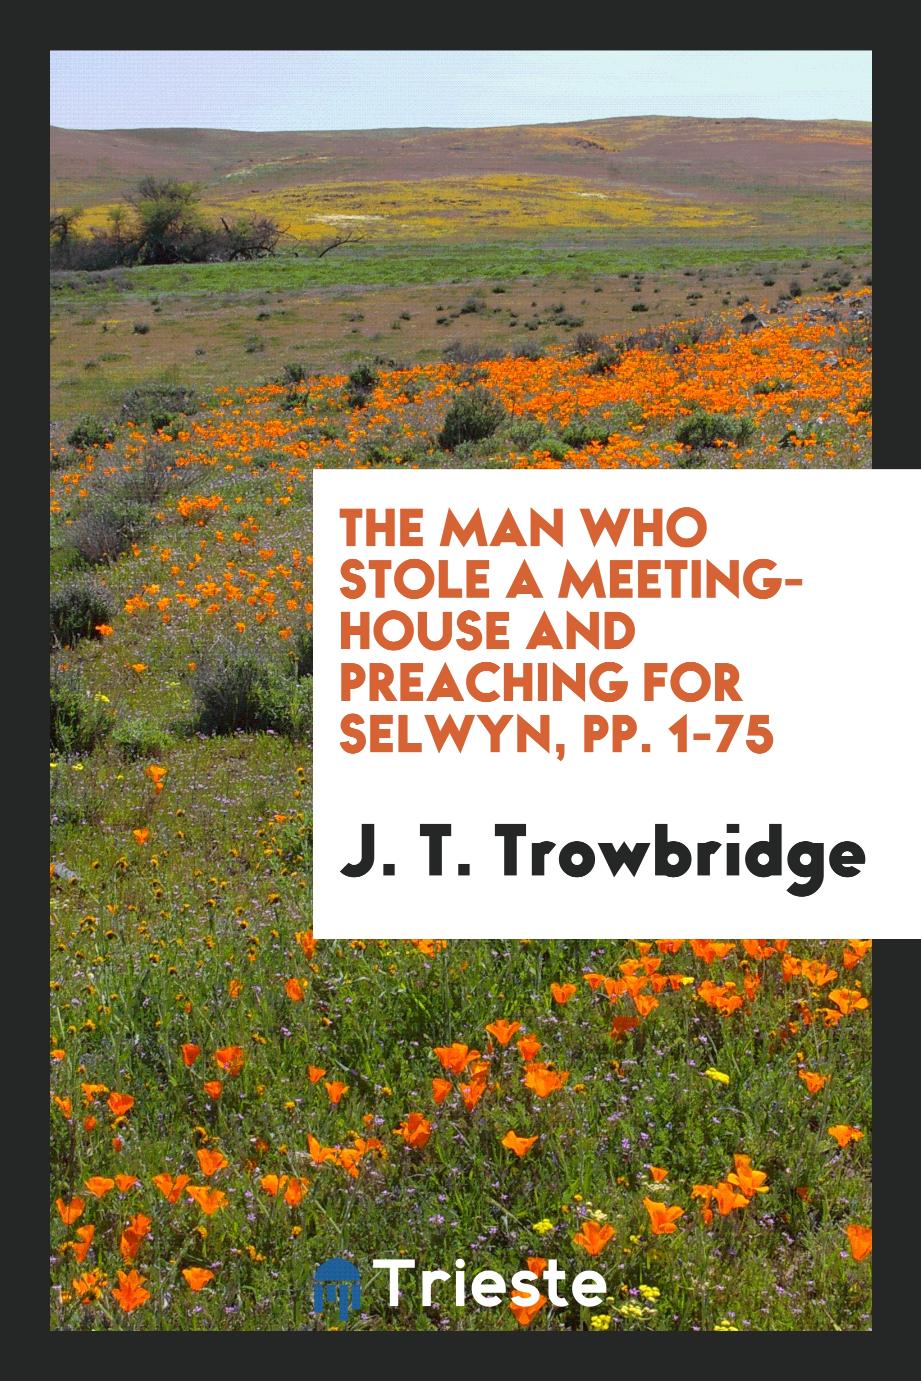 The Man who Stole a Meeting-house And Preaching for Selwyn, pp. 1-75